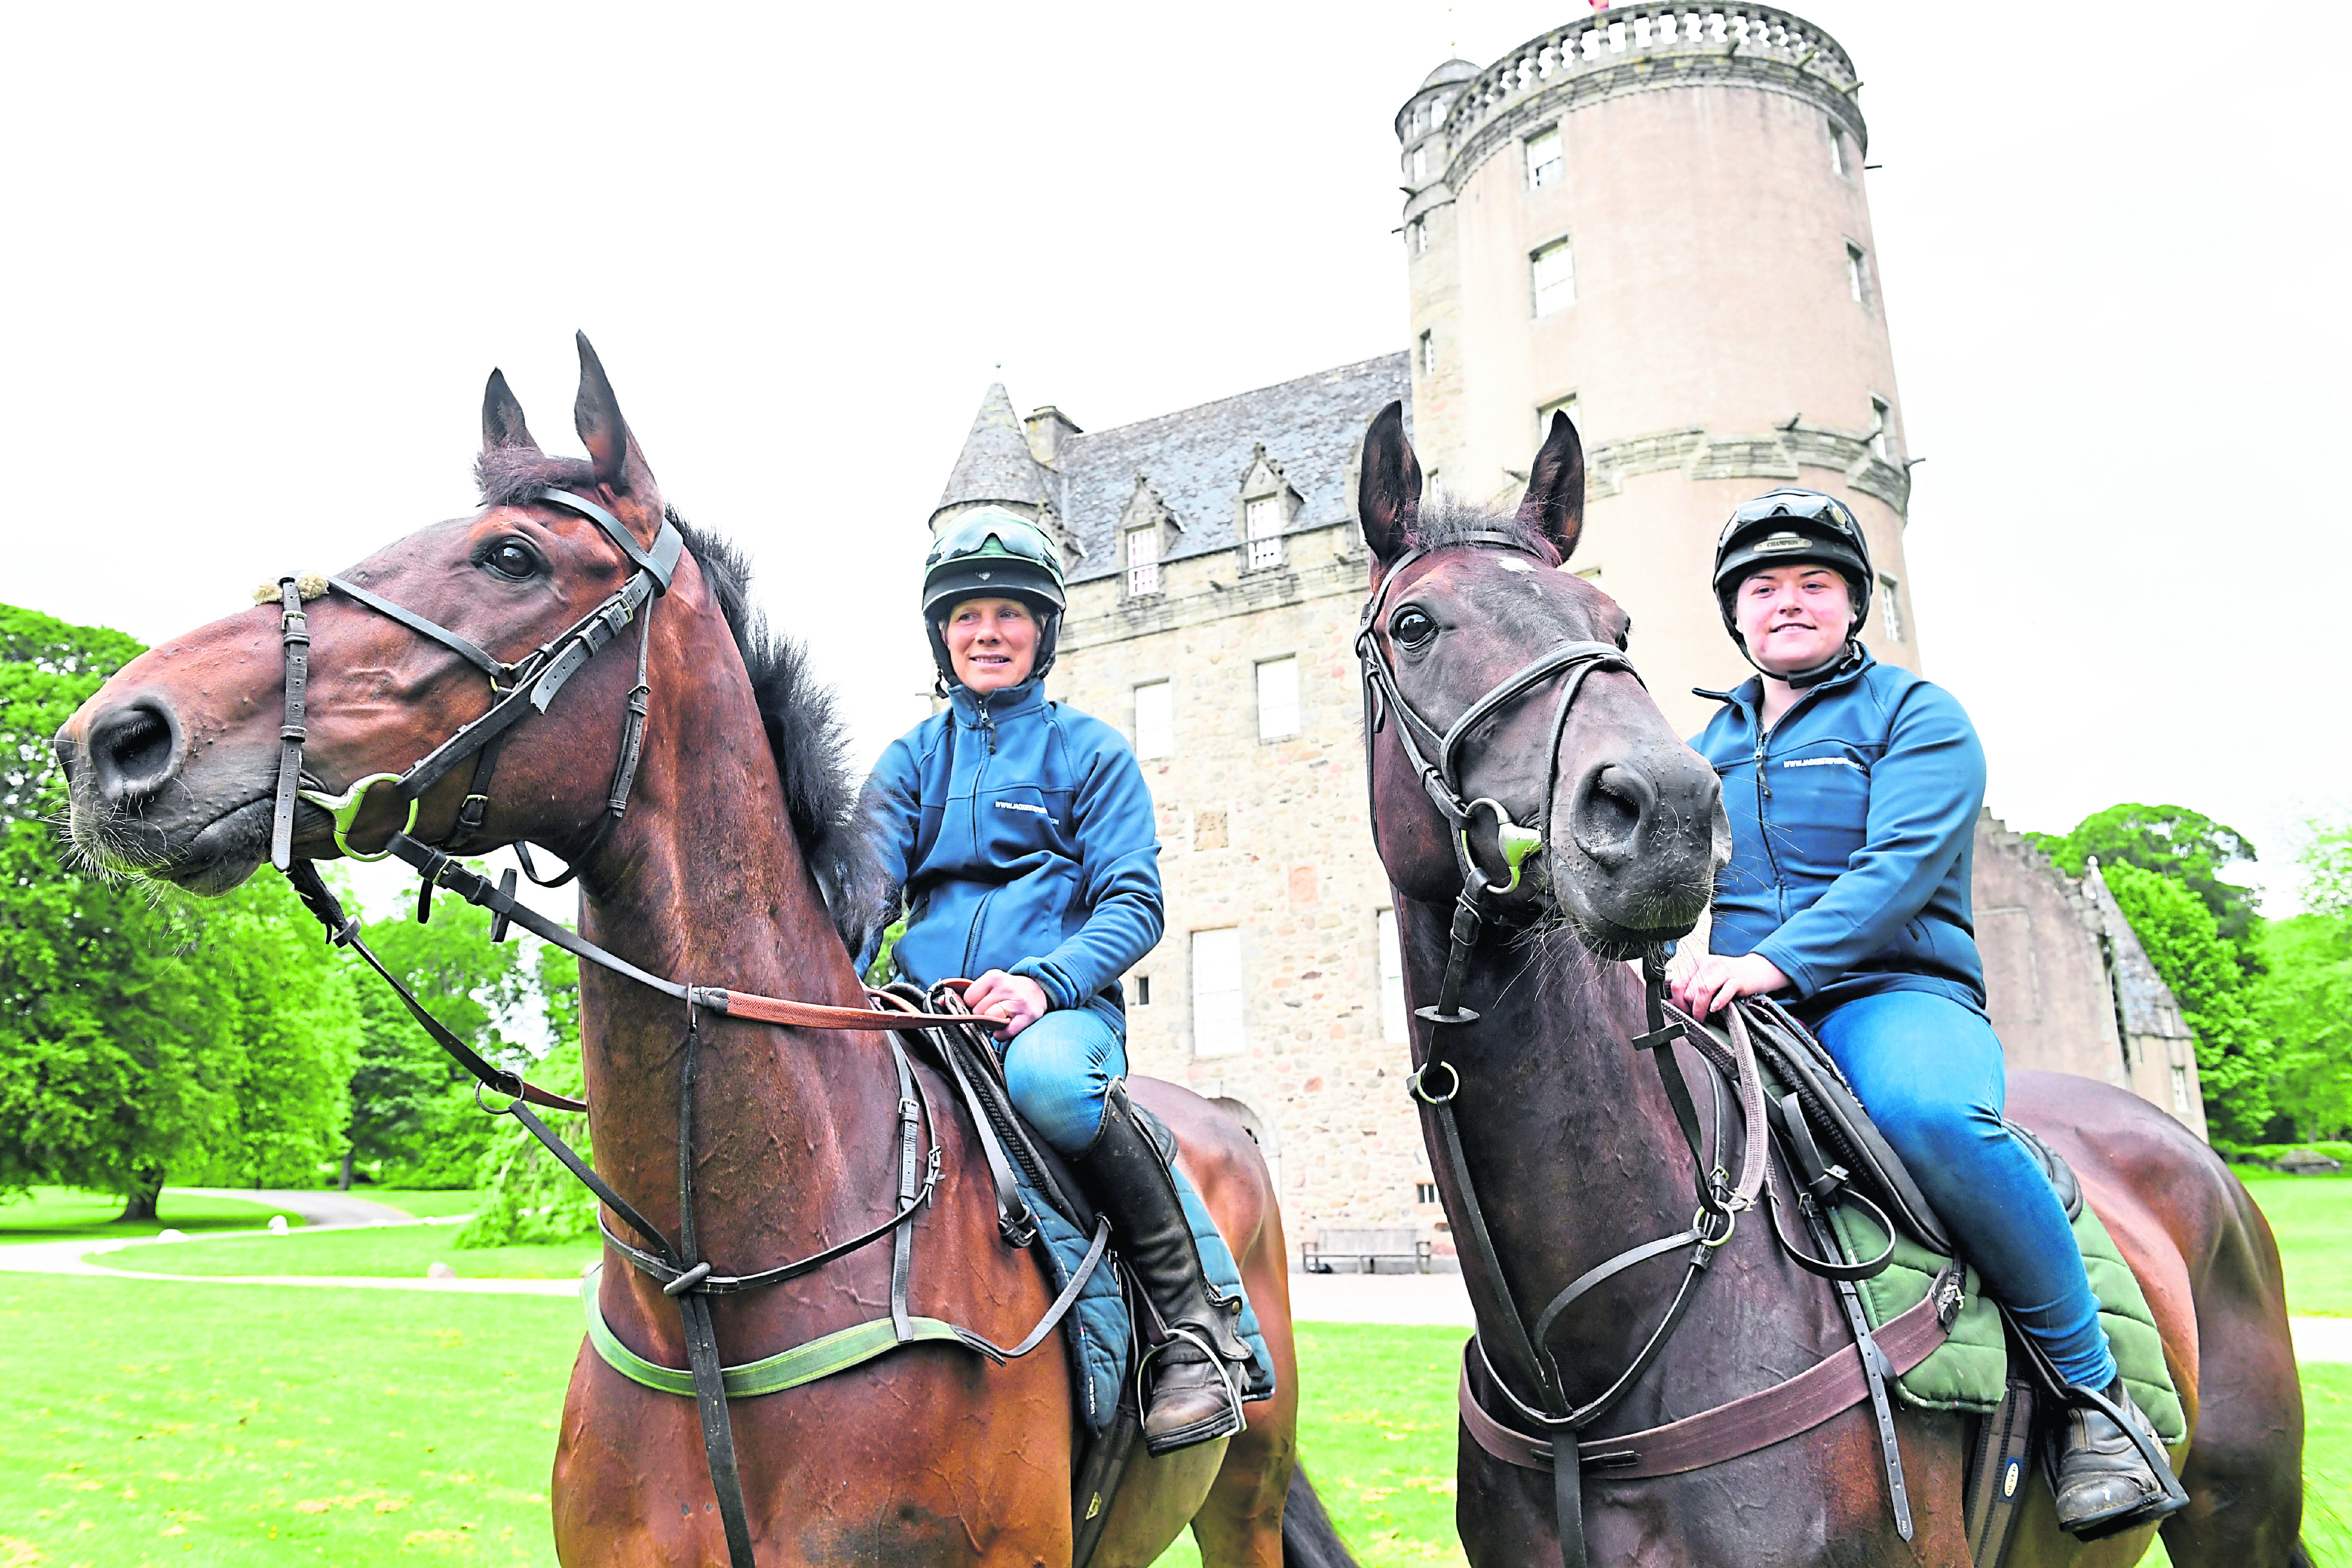 Pictured - At Castle Fraser, L-R Jackie Stephen riding Welcome Ben and Rachael Grant riding Highland Peak.   
Picture by Kami Thomson.